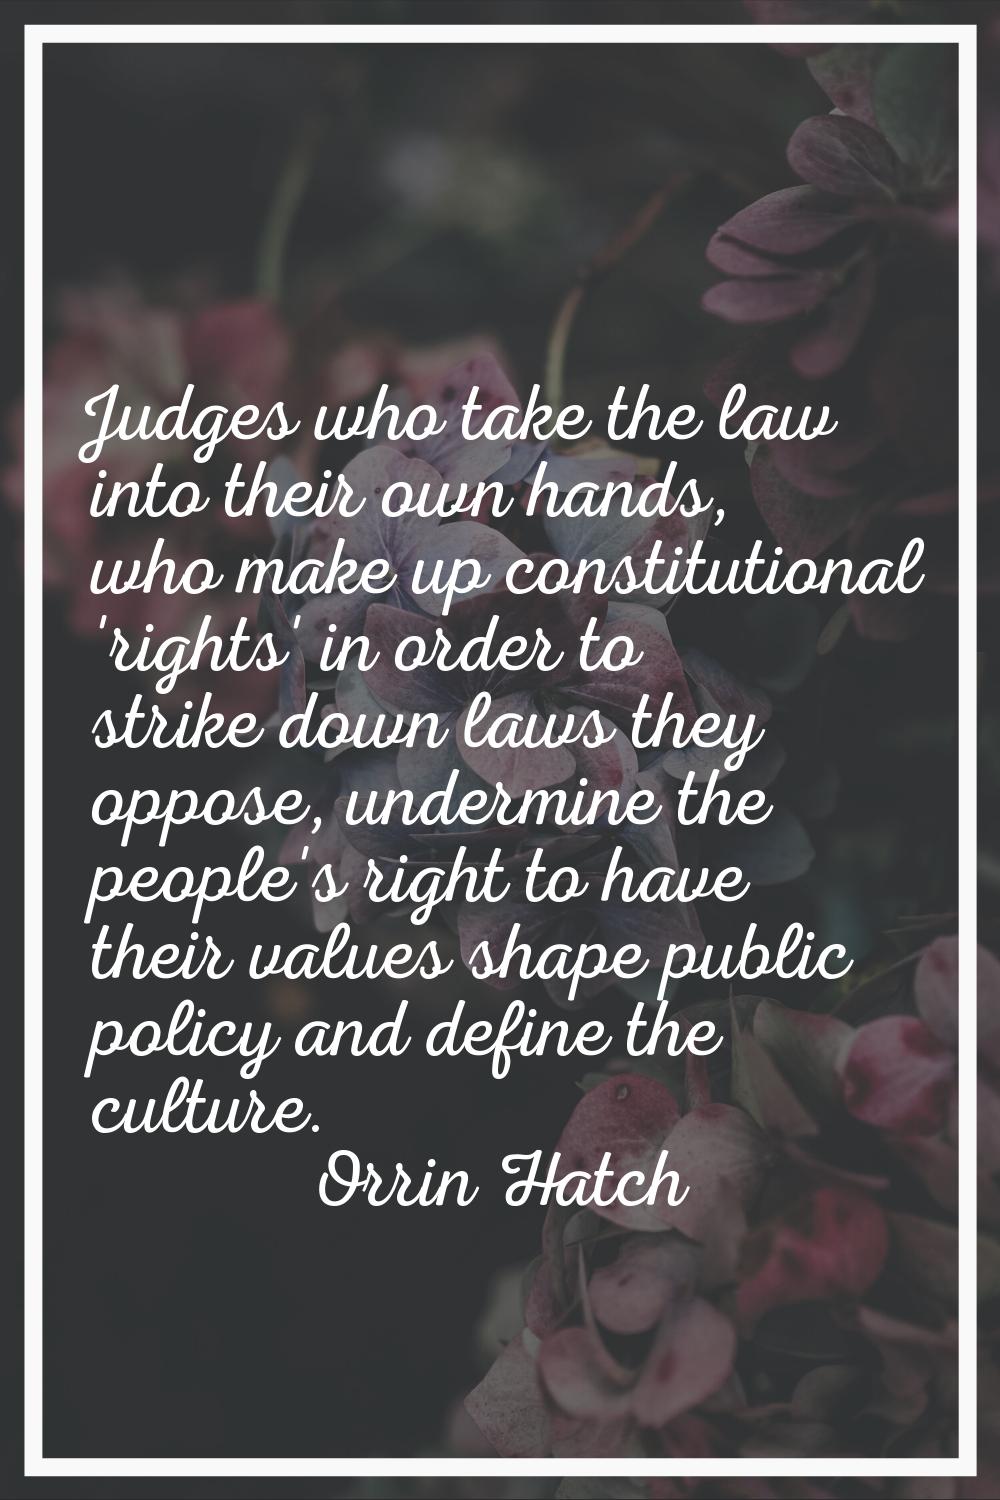 Judges who take the law into their own hands, who make up constitutional 'rights' in order to strik